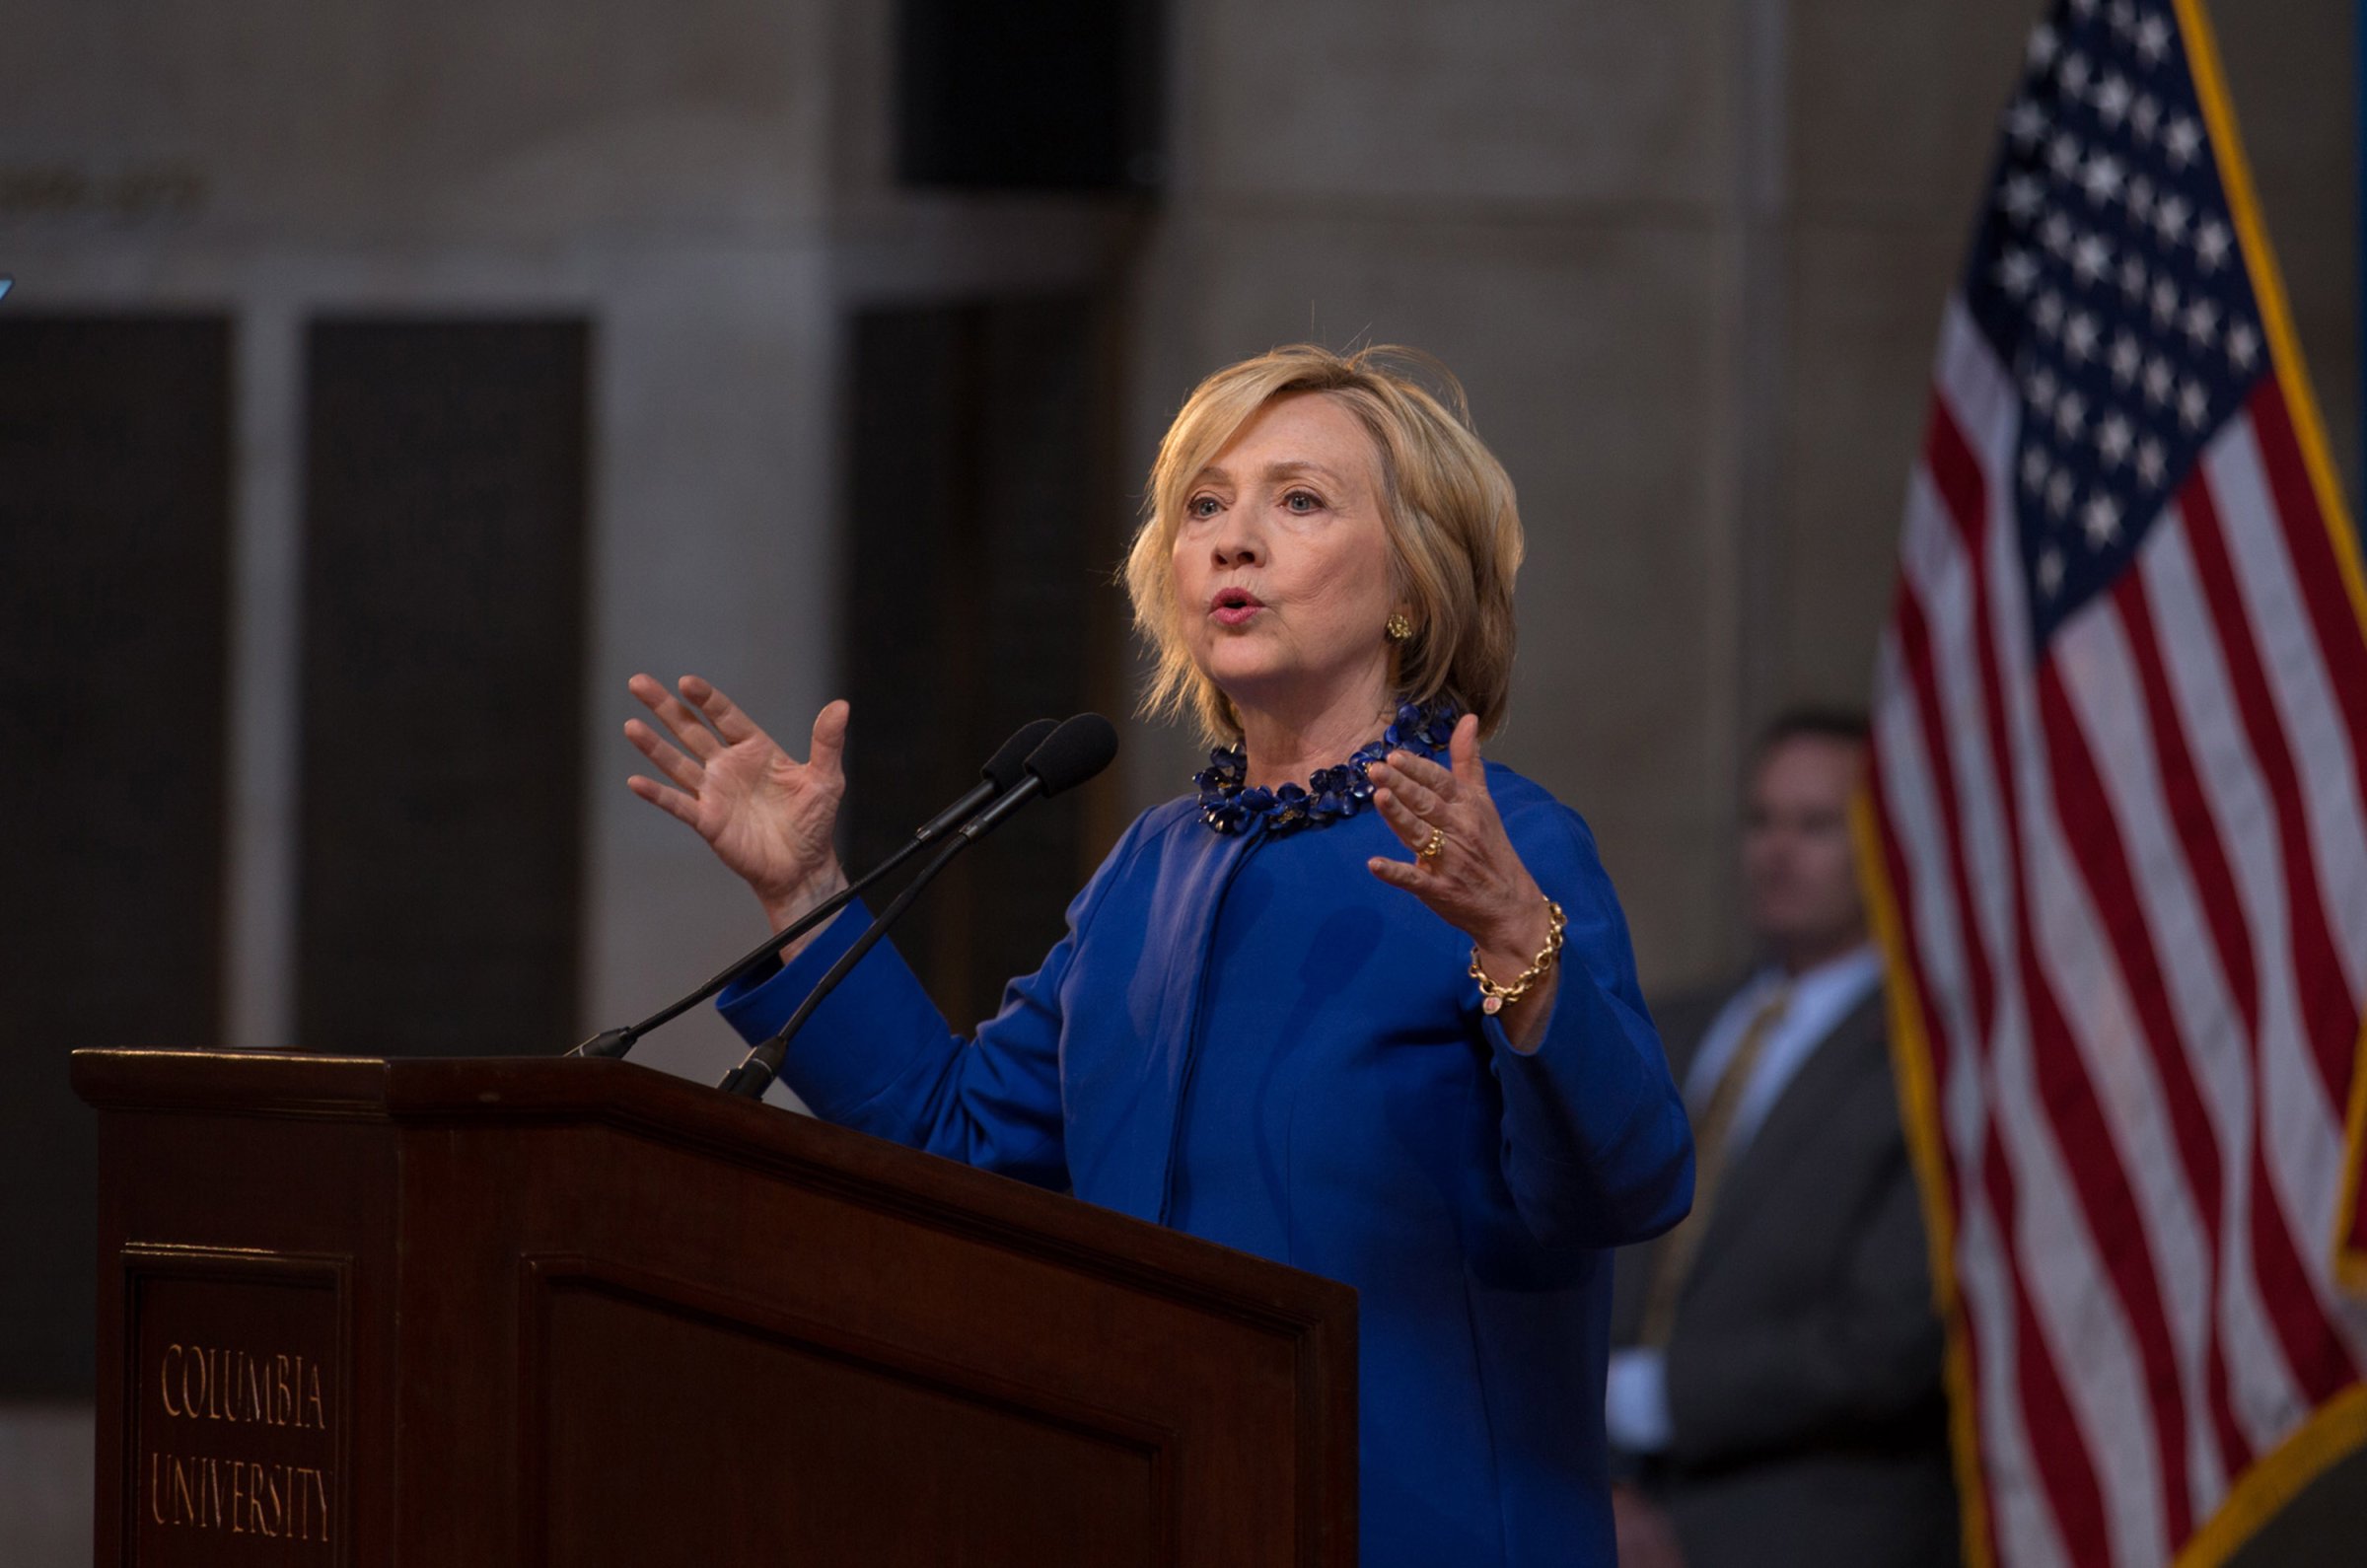 NEW YORK, NY - APRIL 29: Presidential candidate Hillary Rodham Clinton delivered a speech during the David Dinkins Leadership and Public Policy Forum at Columbia University in Manhattan, NY April 29, 2015.  (Photo by Kevin Hagen/Getty Images)